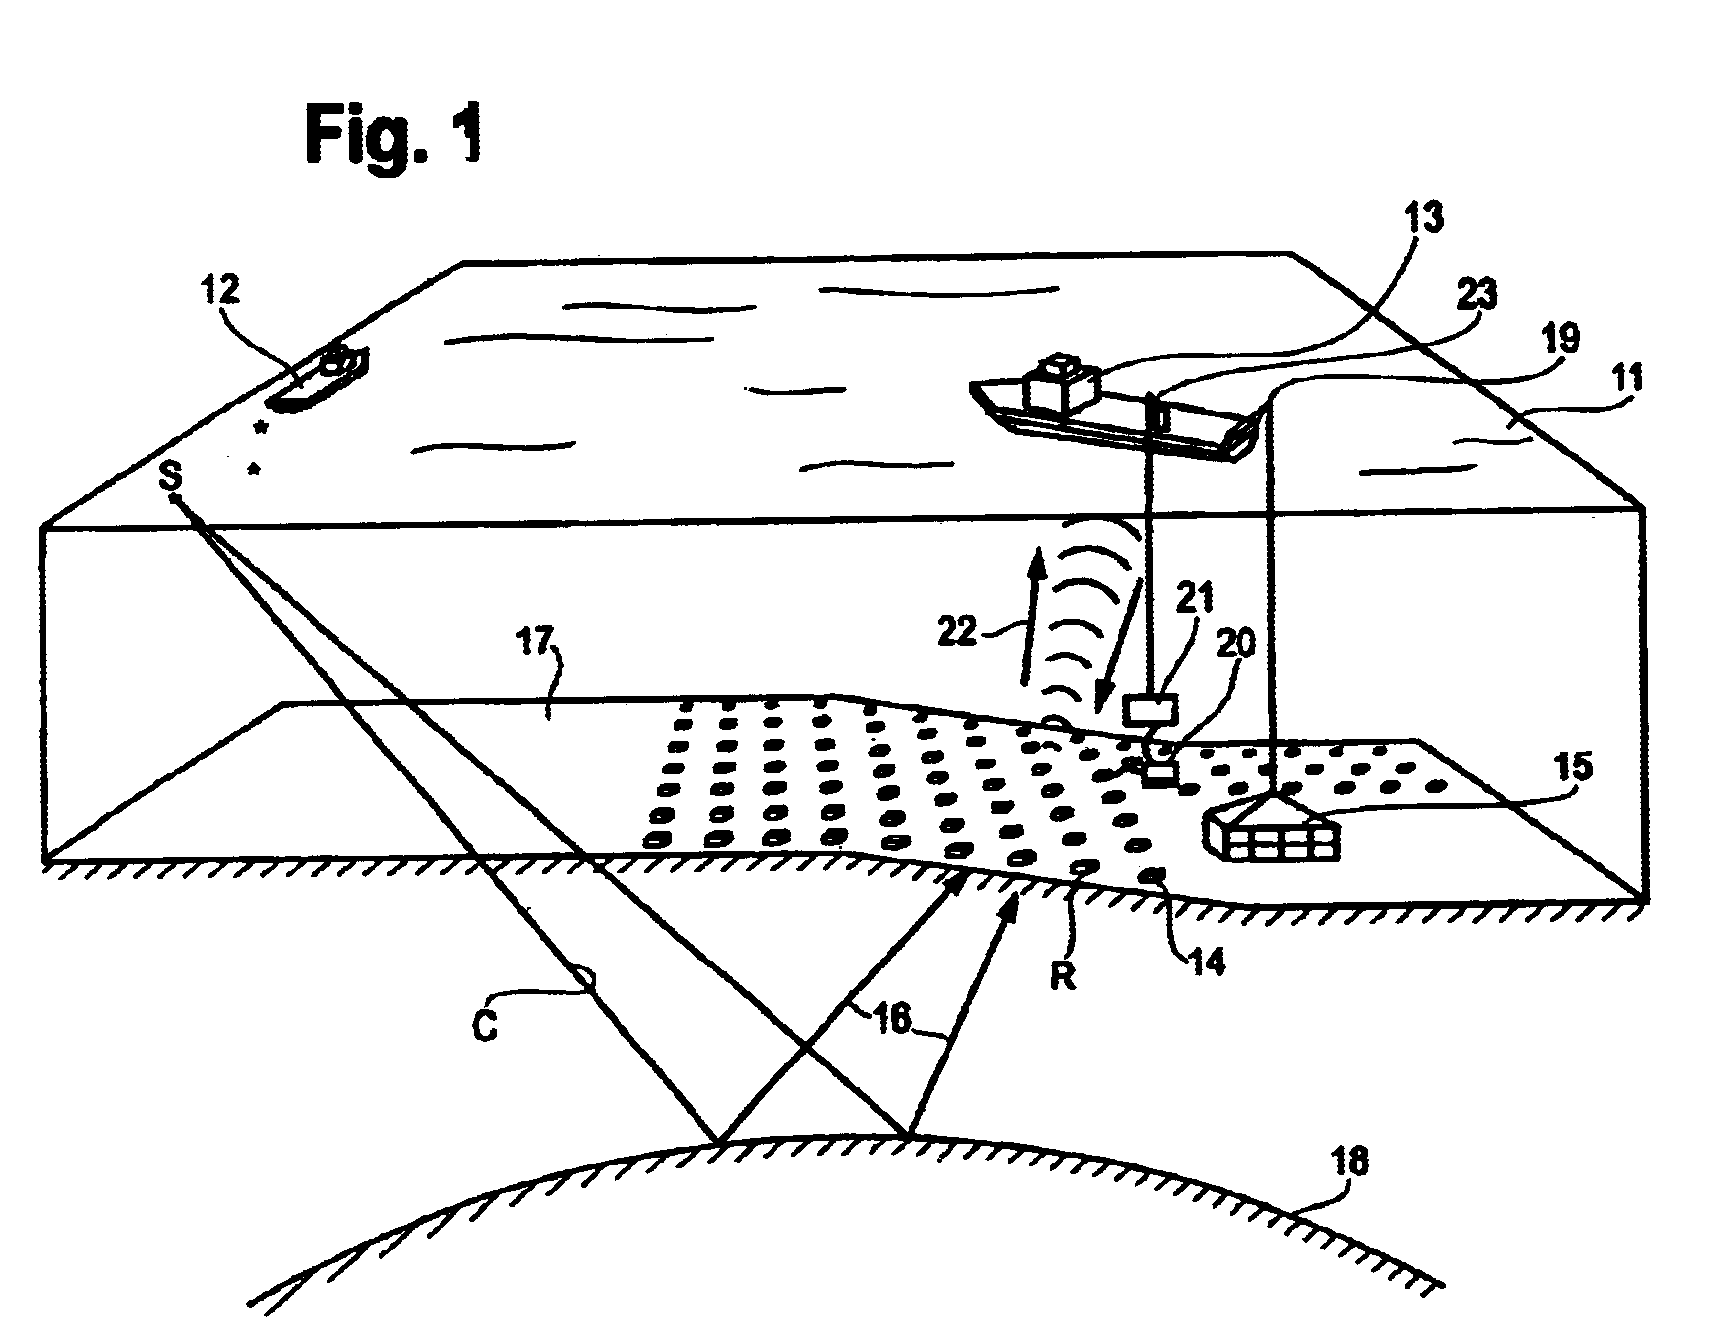 Geophysical method and apparatus